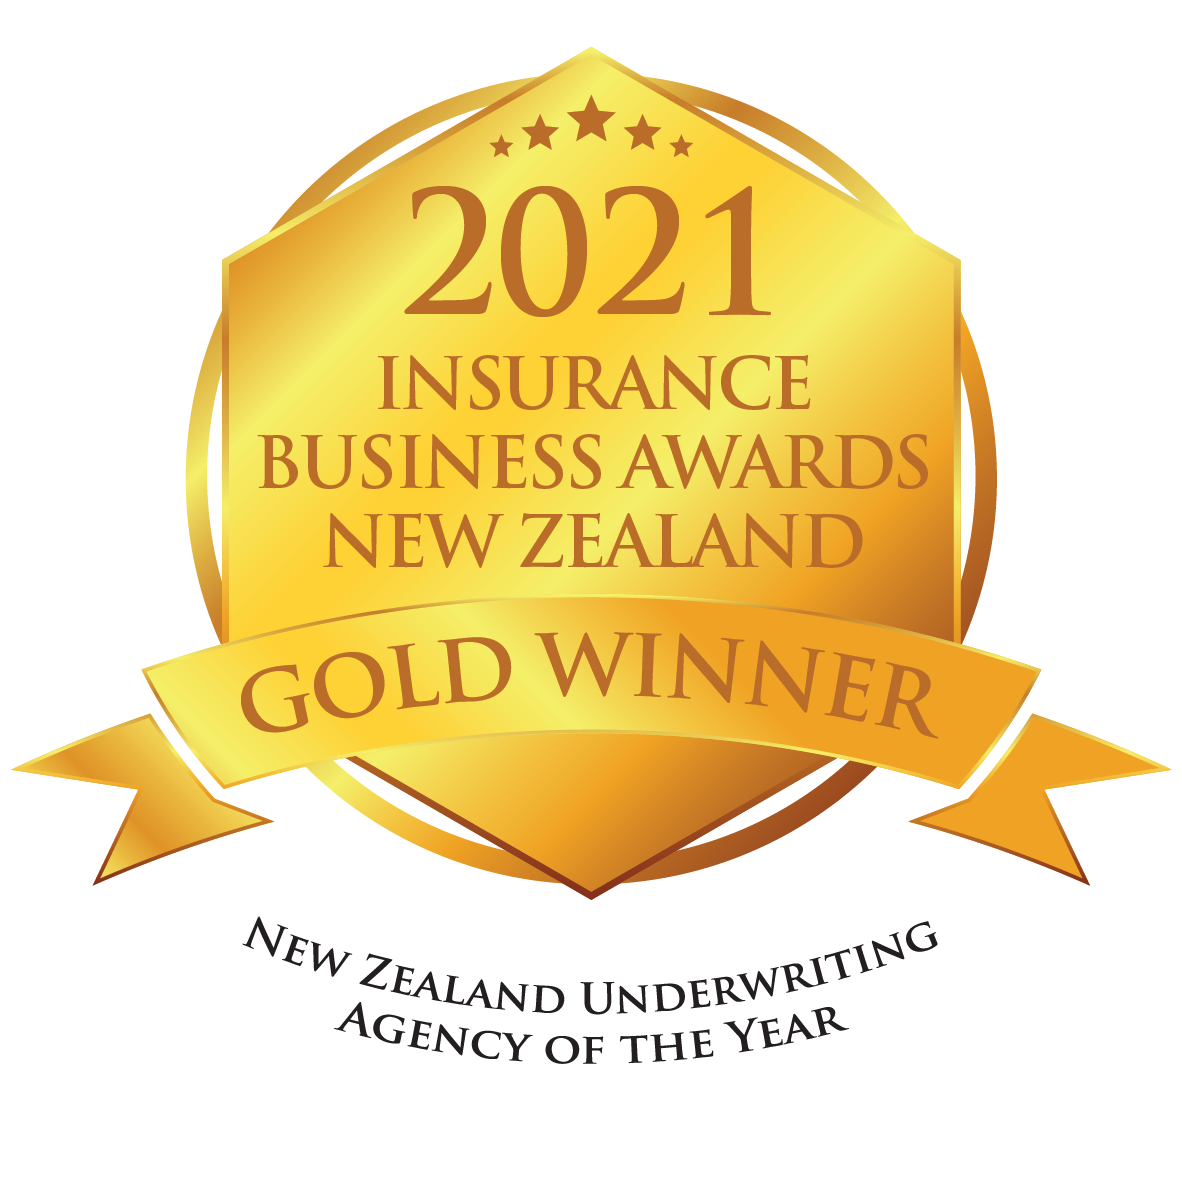 Underwriting Agency of the Year 21